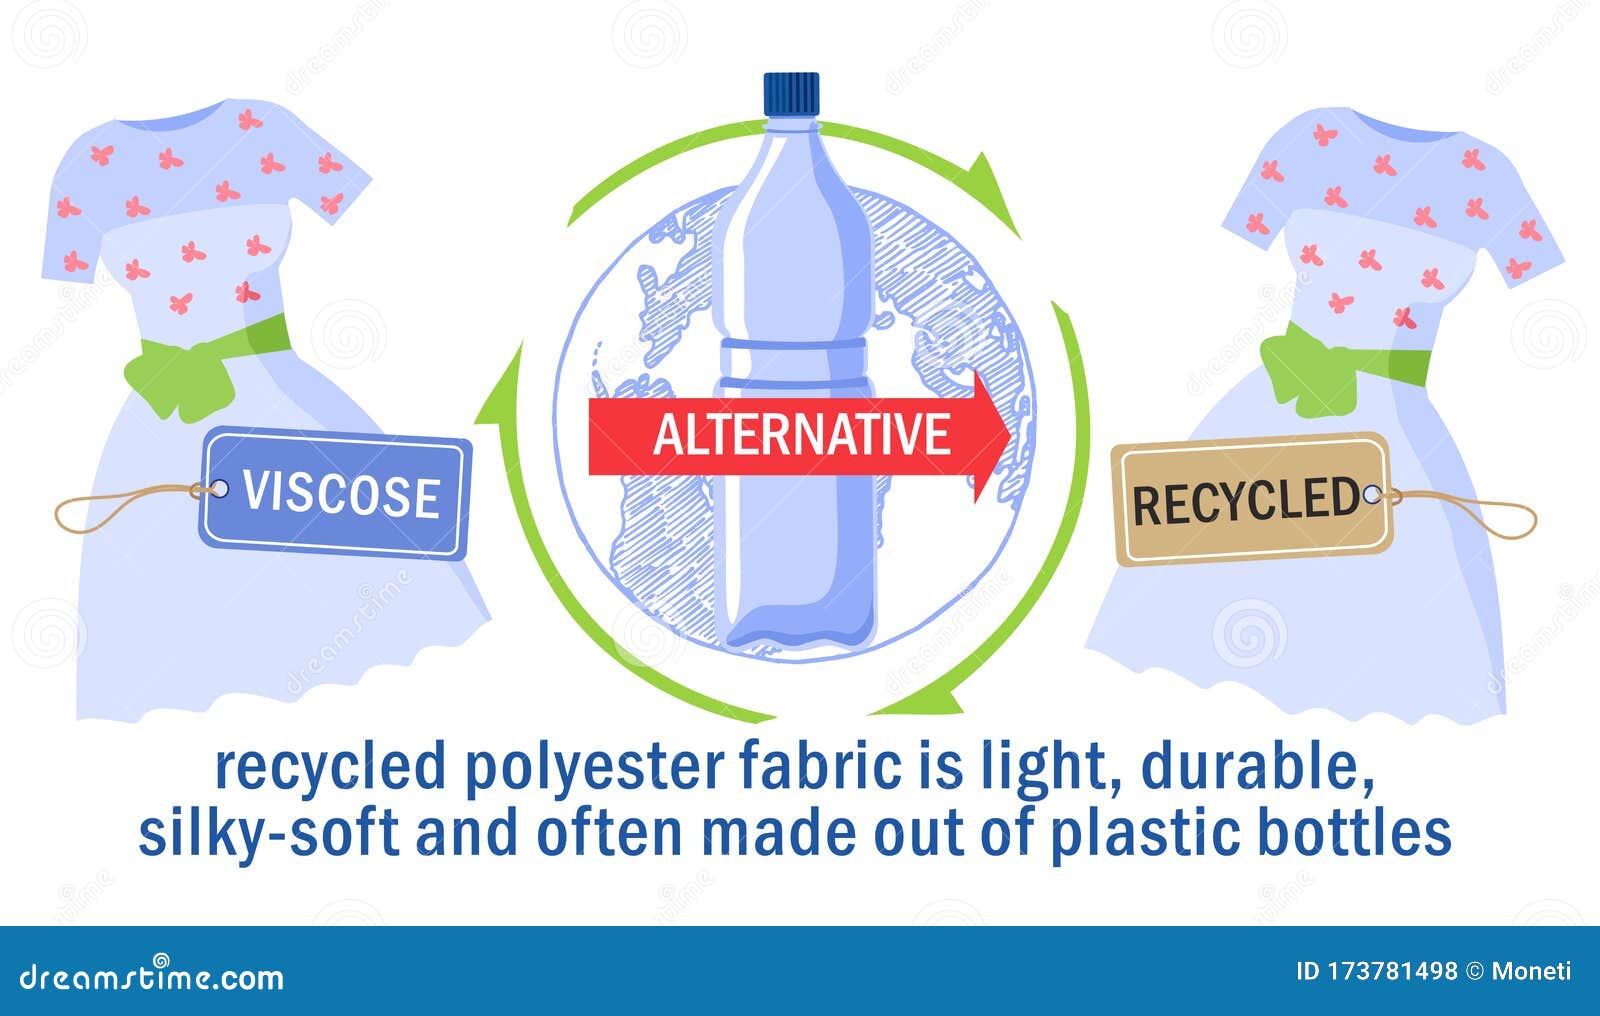 Recycled Polyester Fabric Made Out of Bottles. Protection. Recycling Clothes. Zero Waste Vector - Illustration of alternative, material: 173781498